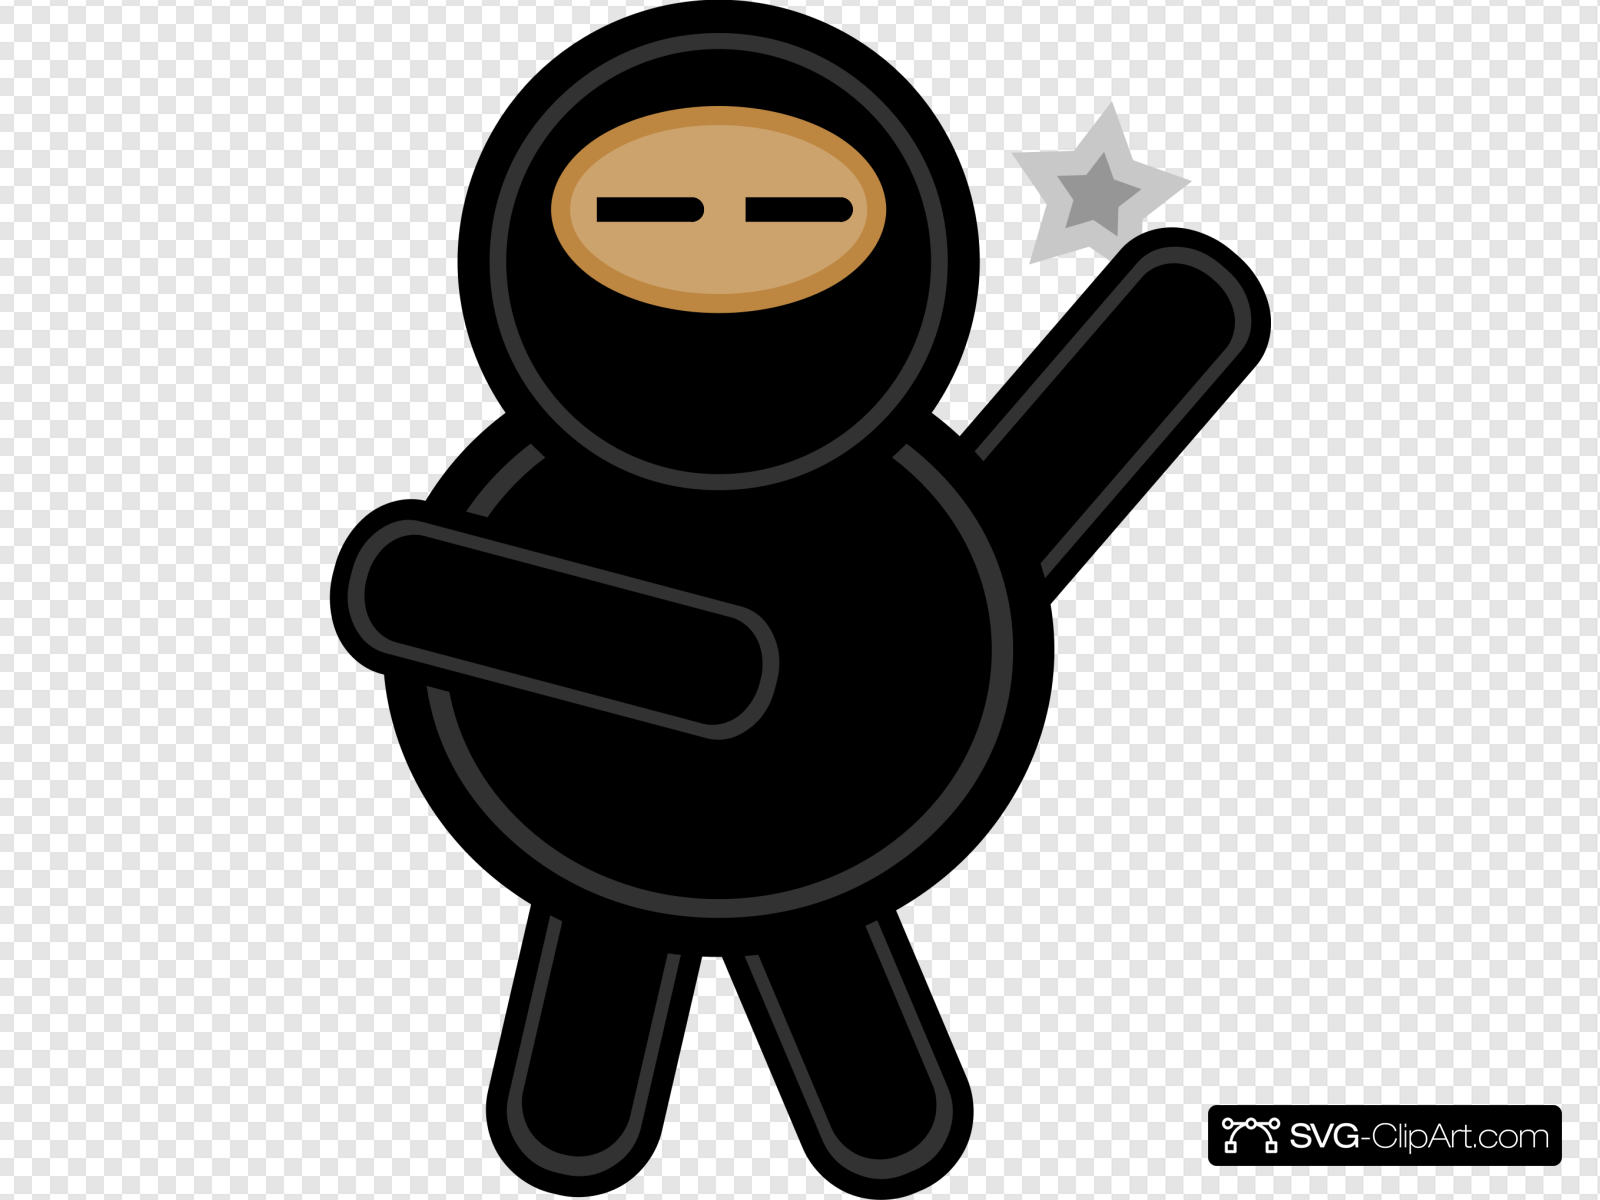 Download Ninja clipart svg pictures on Cliparts Pub 2020!